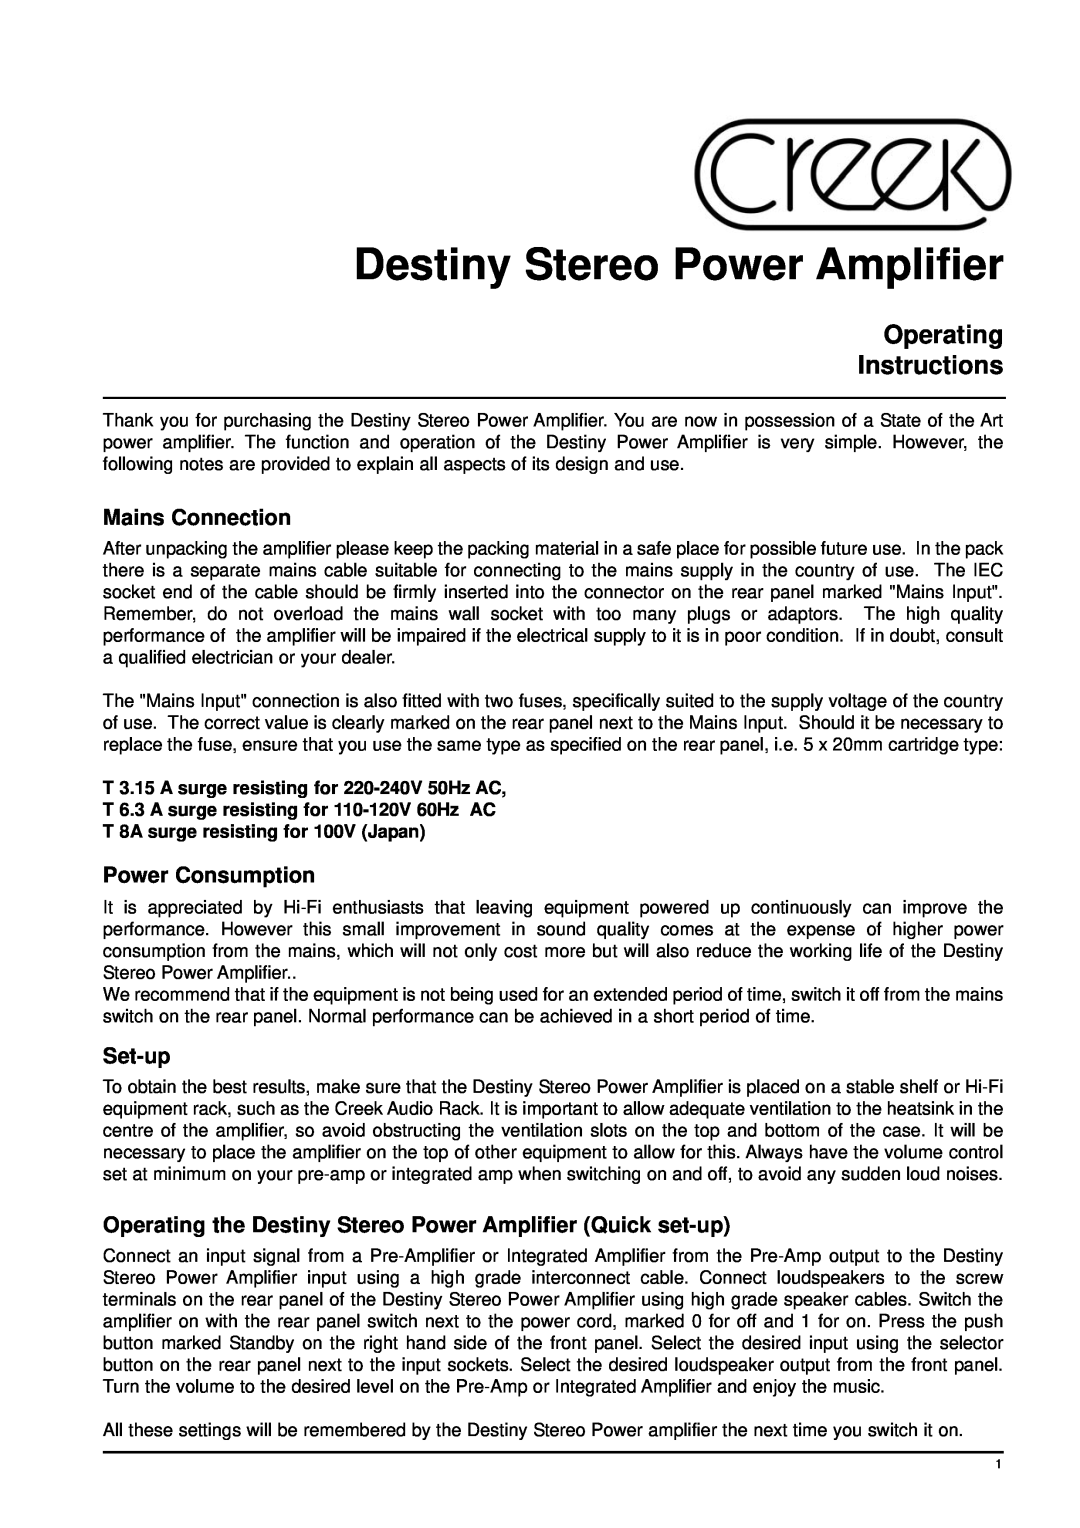 Creek Audio manual Mains Connection, Power Consumption, Set-up, Destiny Stereo Power Amplifier, Operating Instructions 